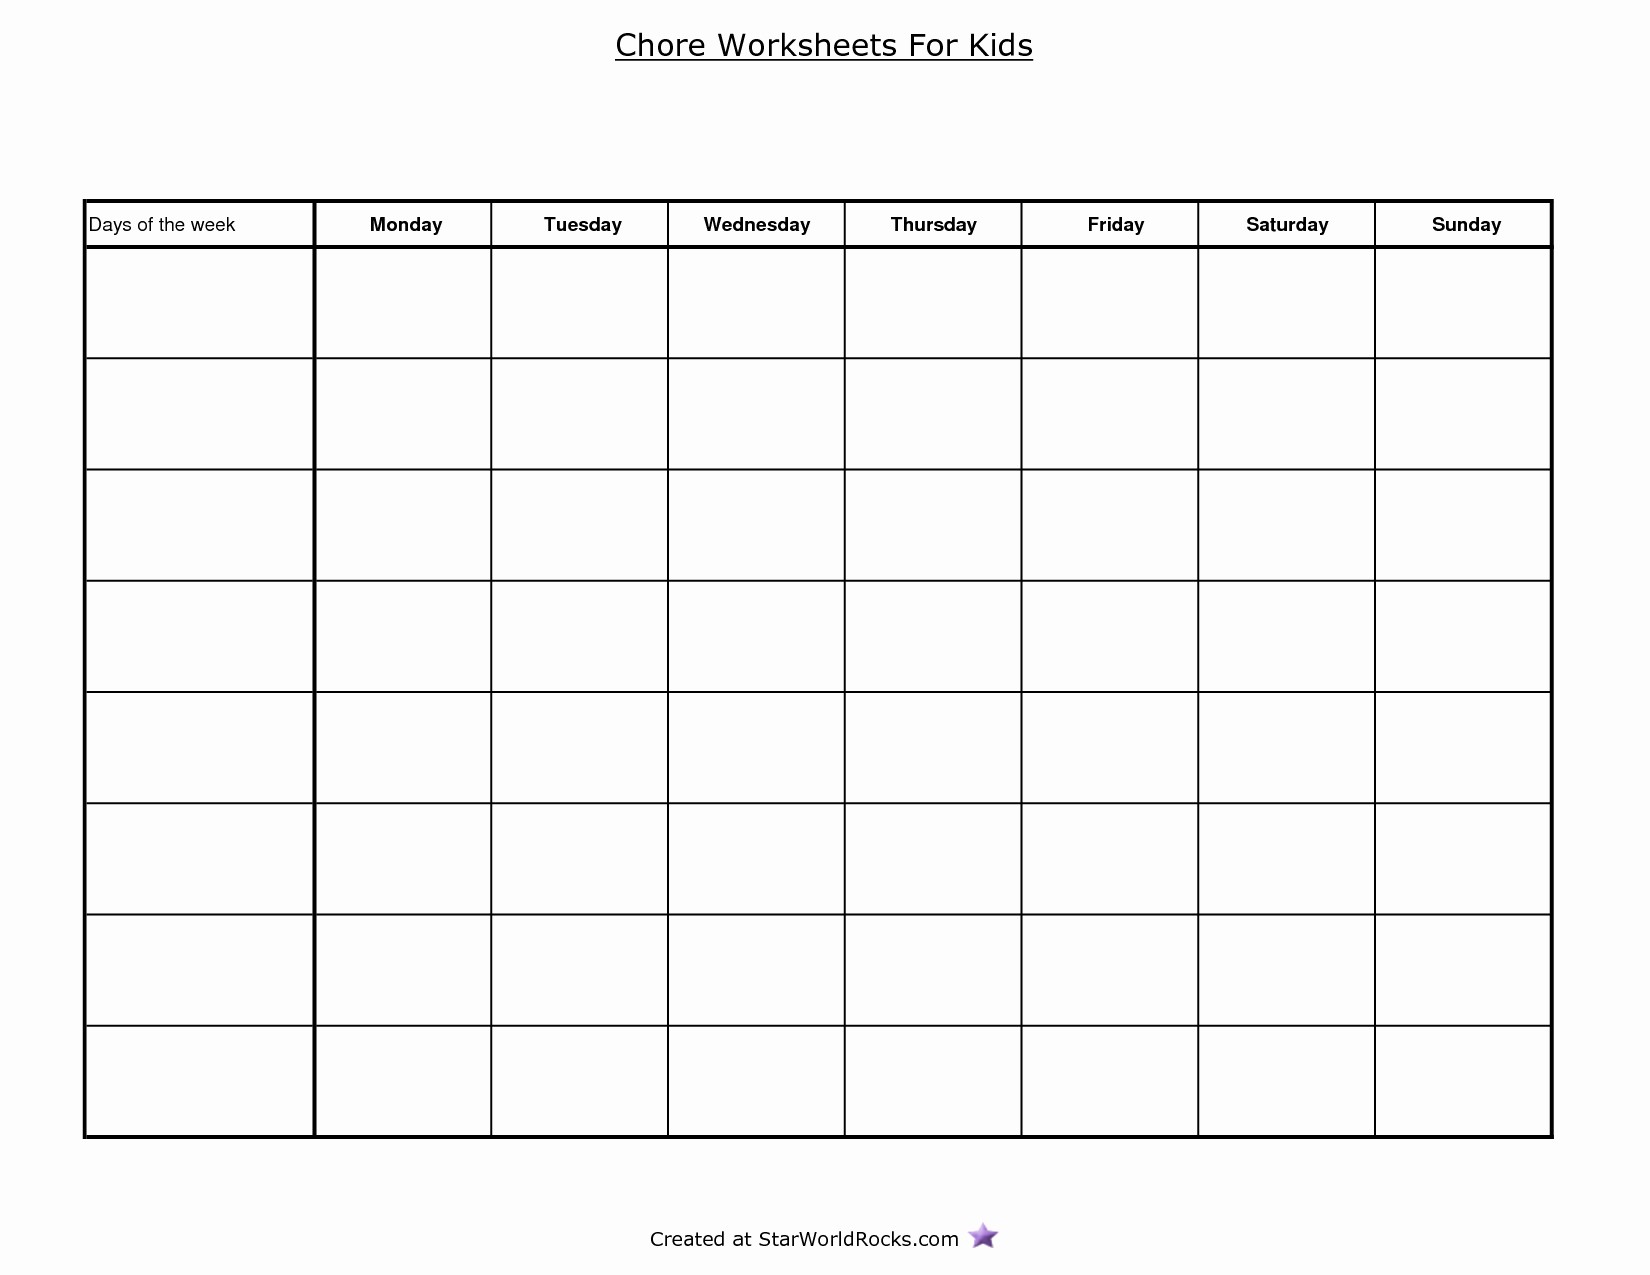 How To Print A Blank Excel Sheet With Gridlines Elegant Tutorials